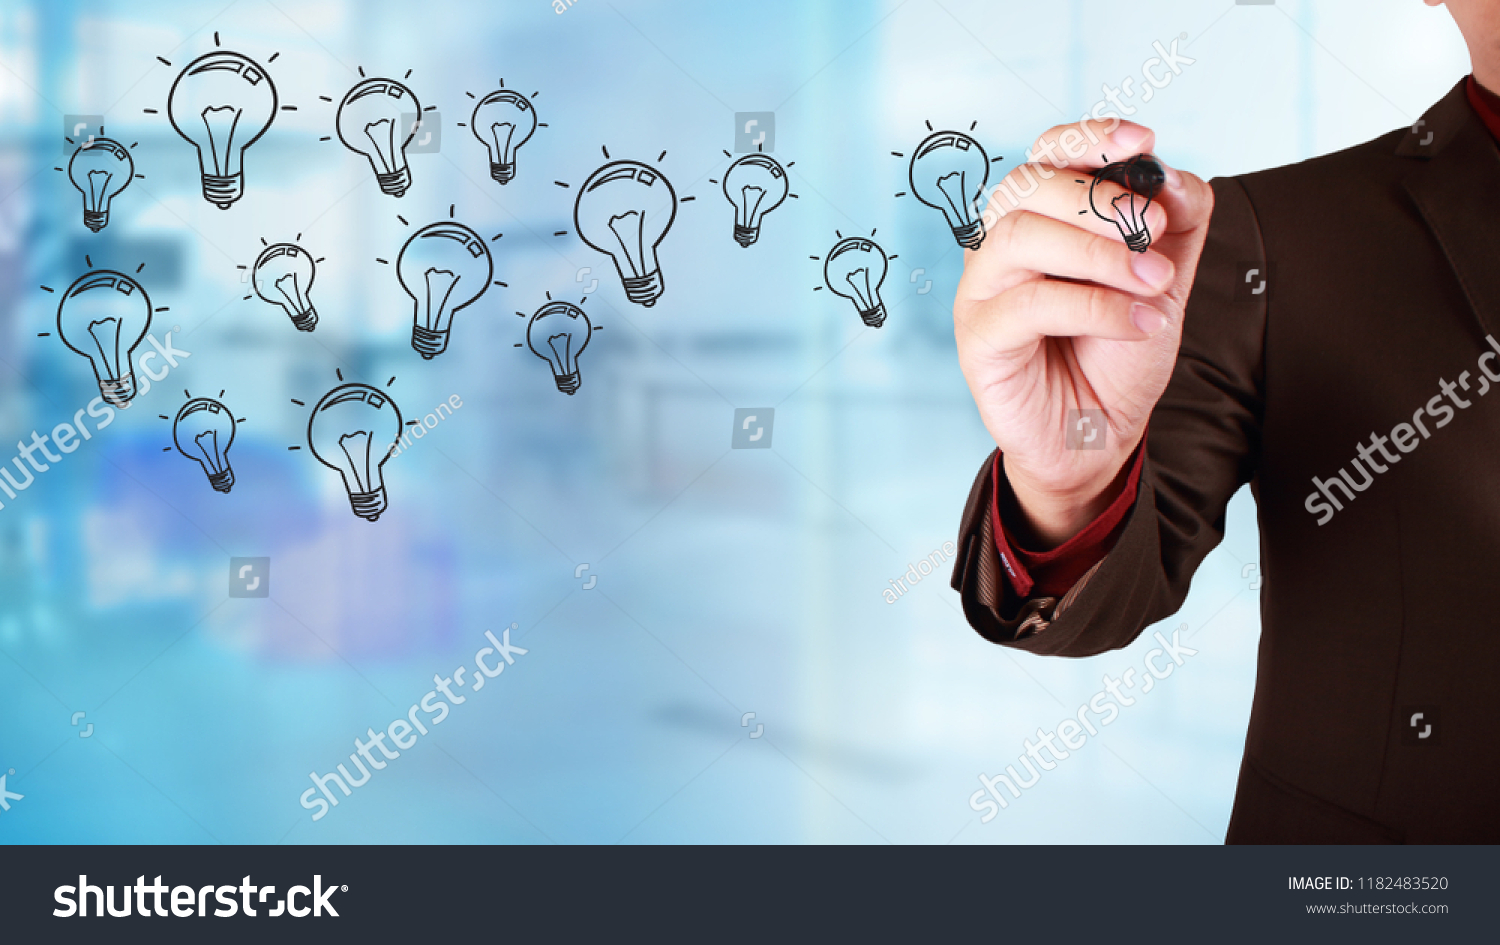 Business concept. Businessman draw on virtual screen with idea light bulb icons flying over. Against blur blueish background #1182483520